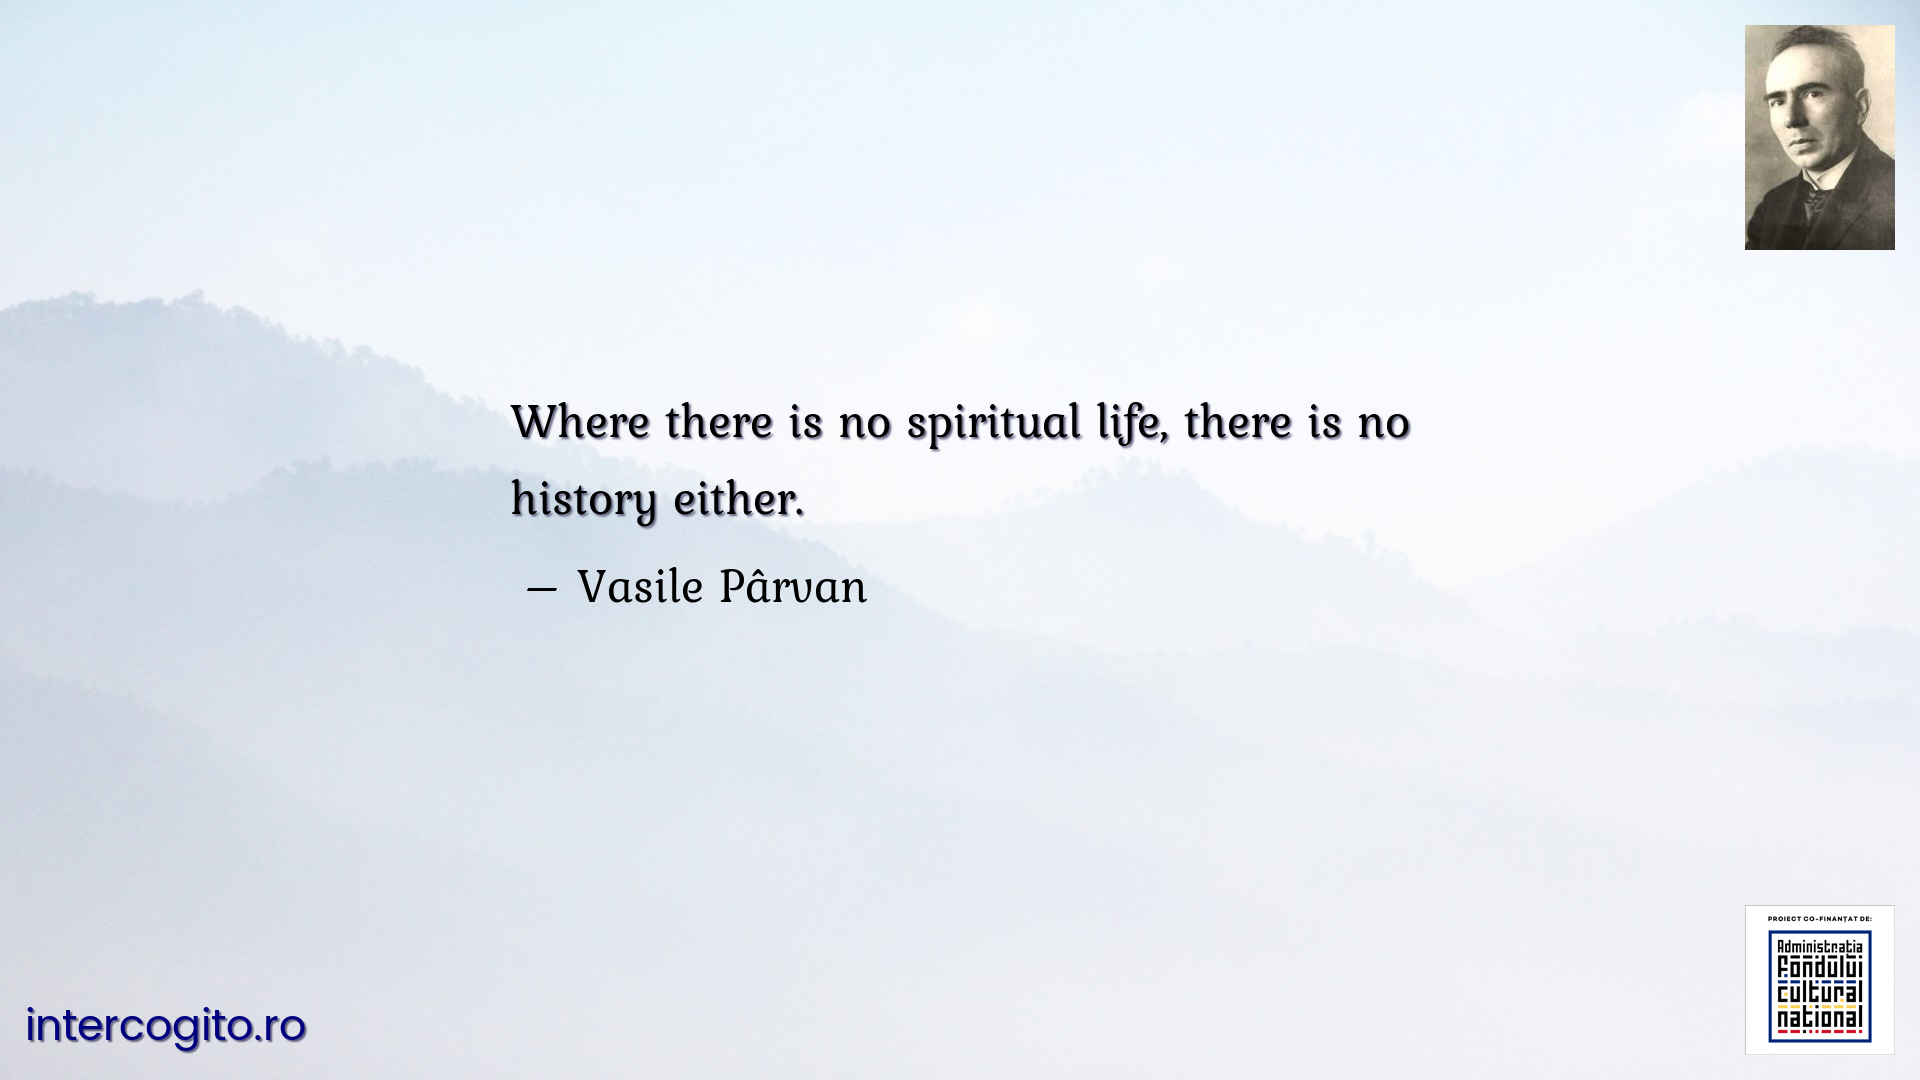 Where there is no spiritual life, there is no history either.